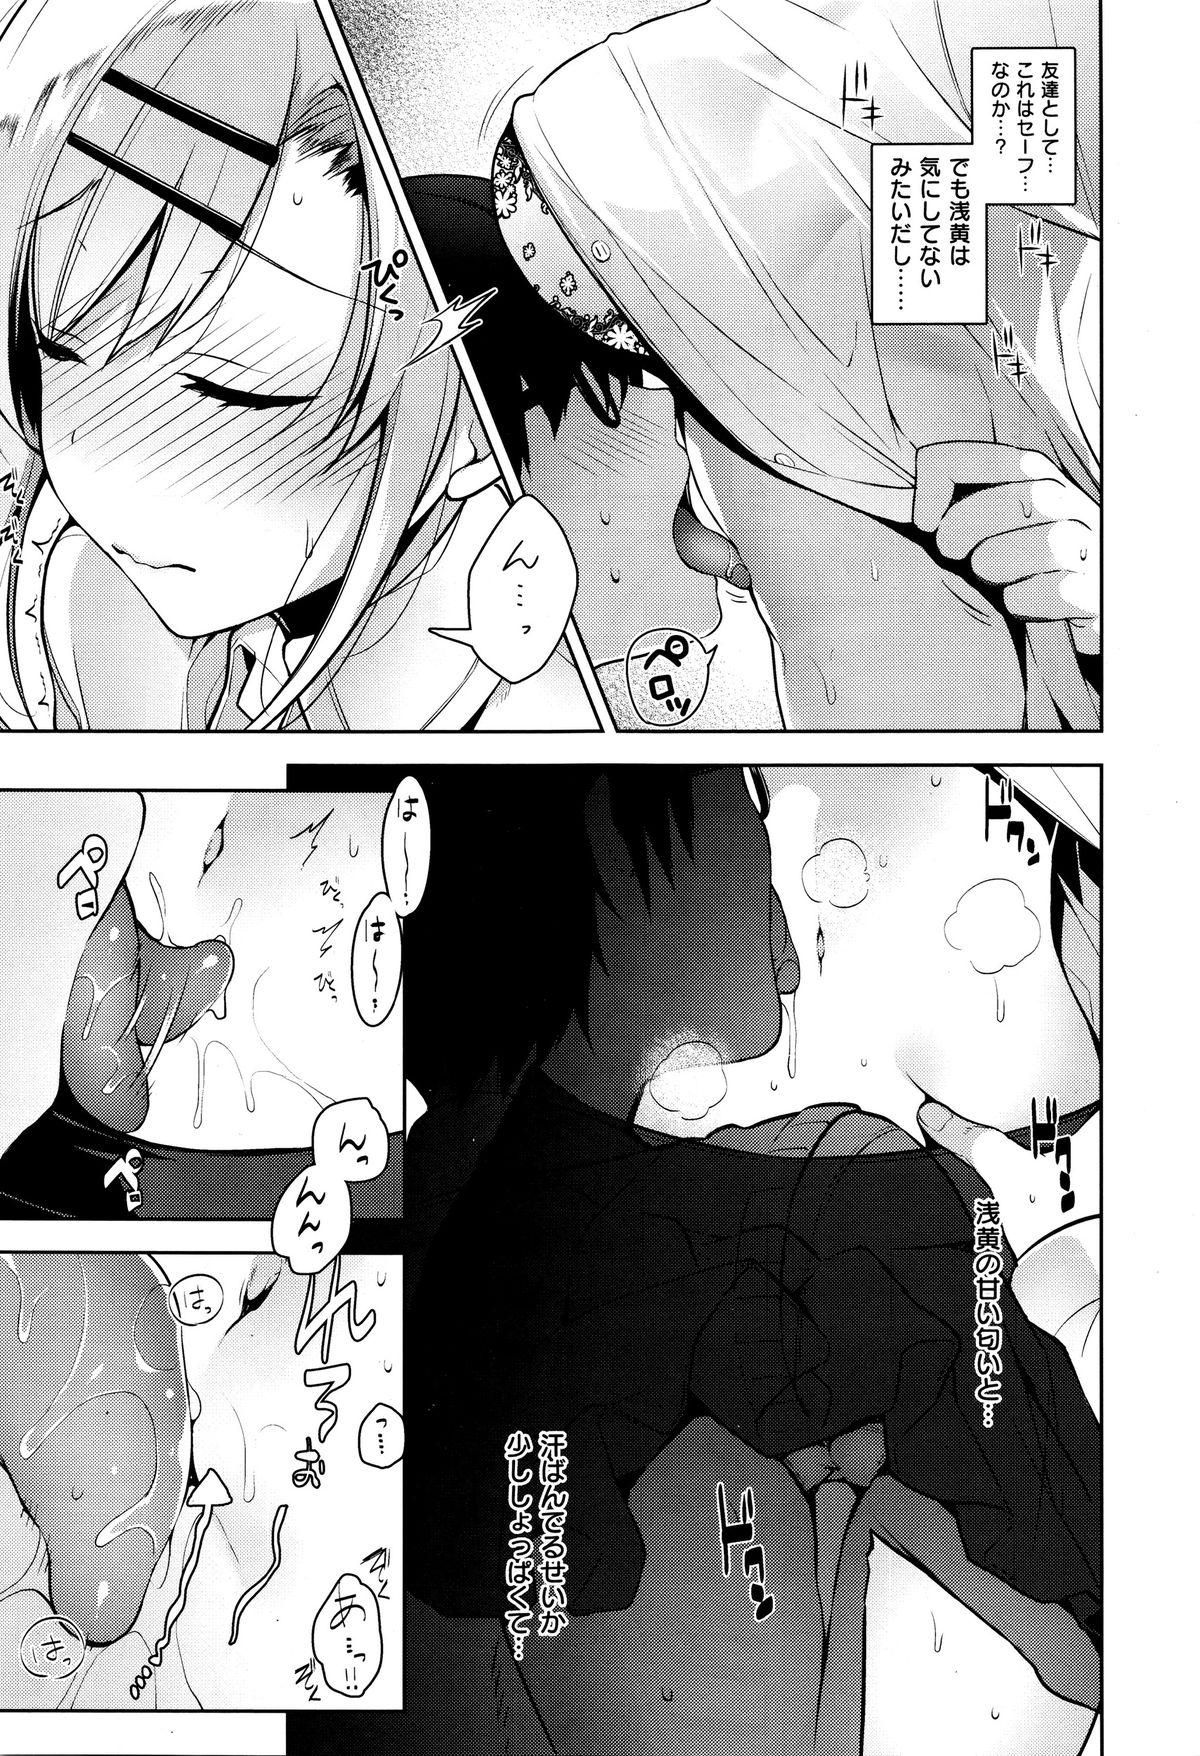 Missionary カノ×2デレ Stroking - Page 11